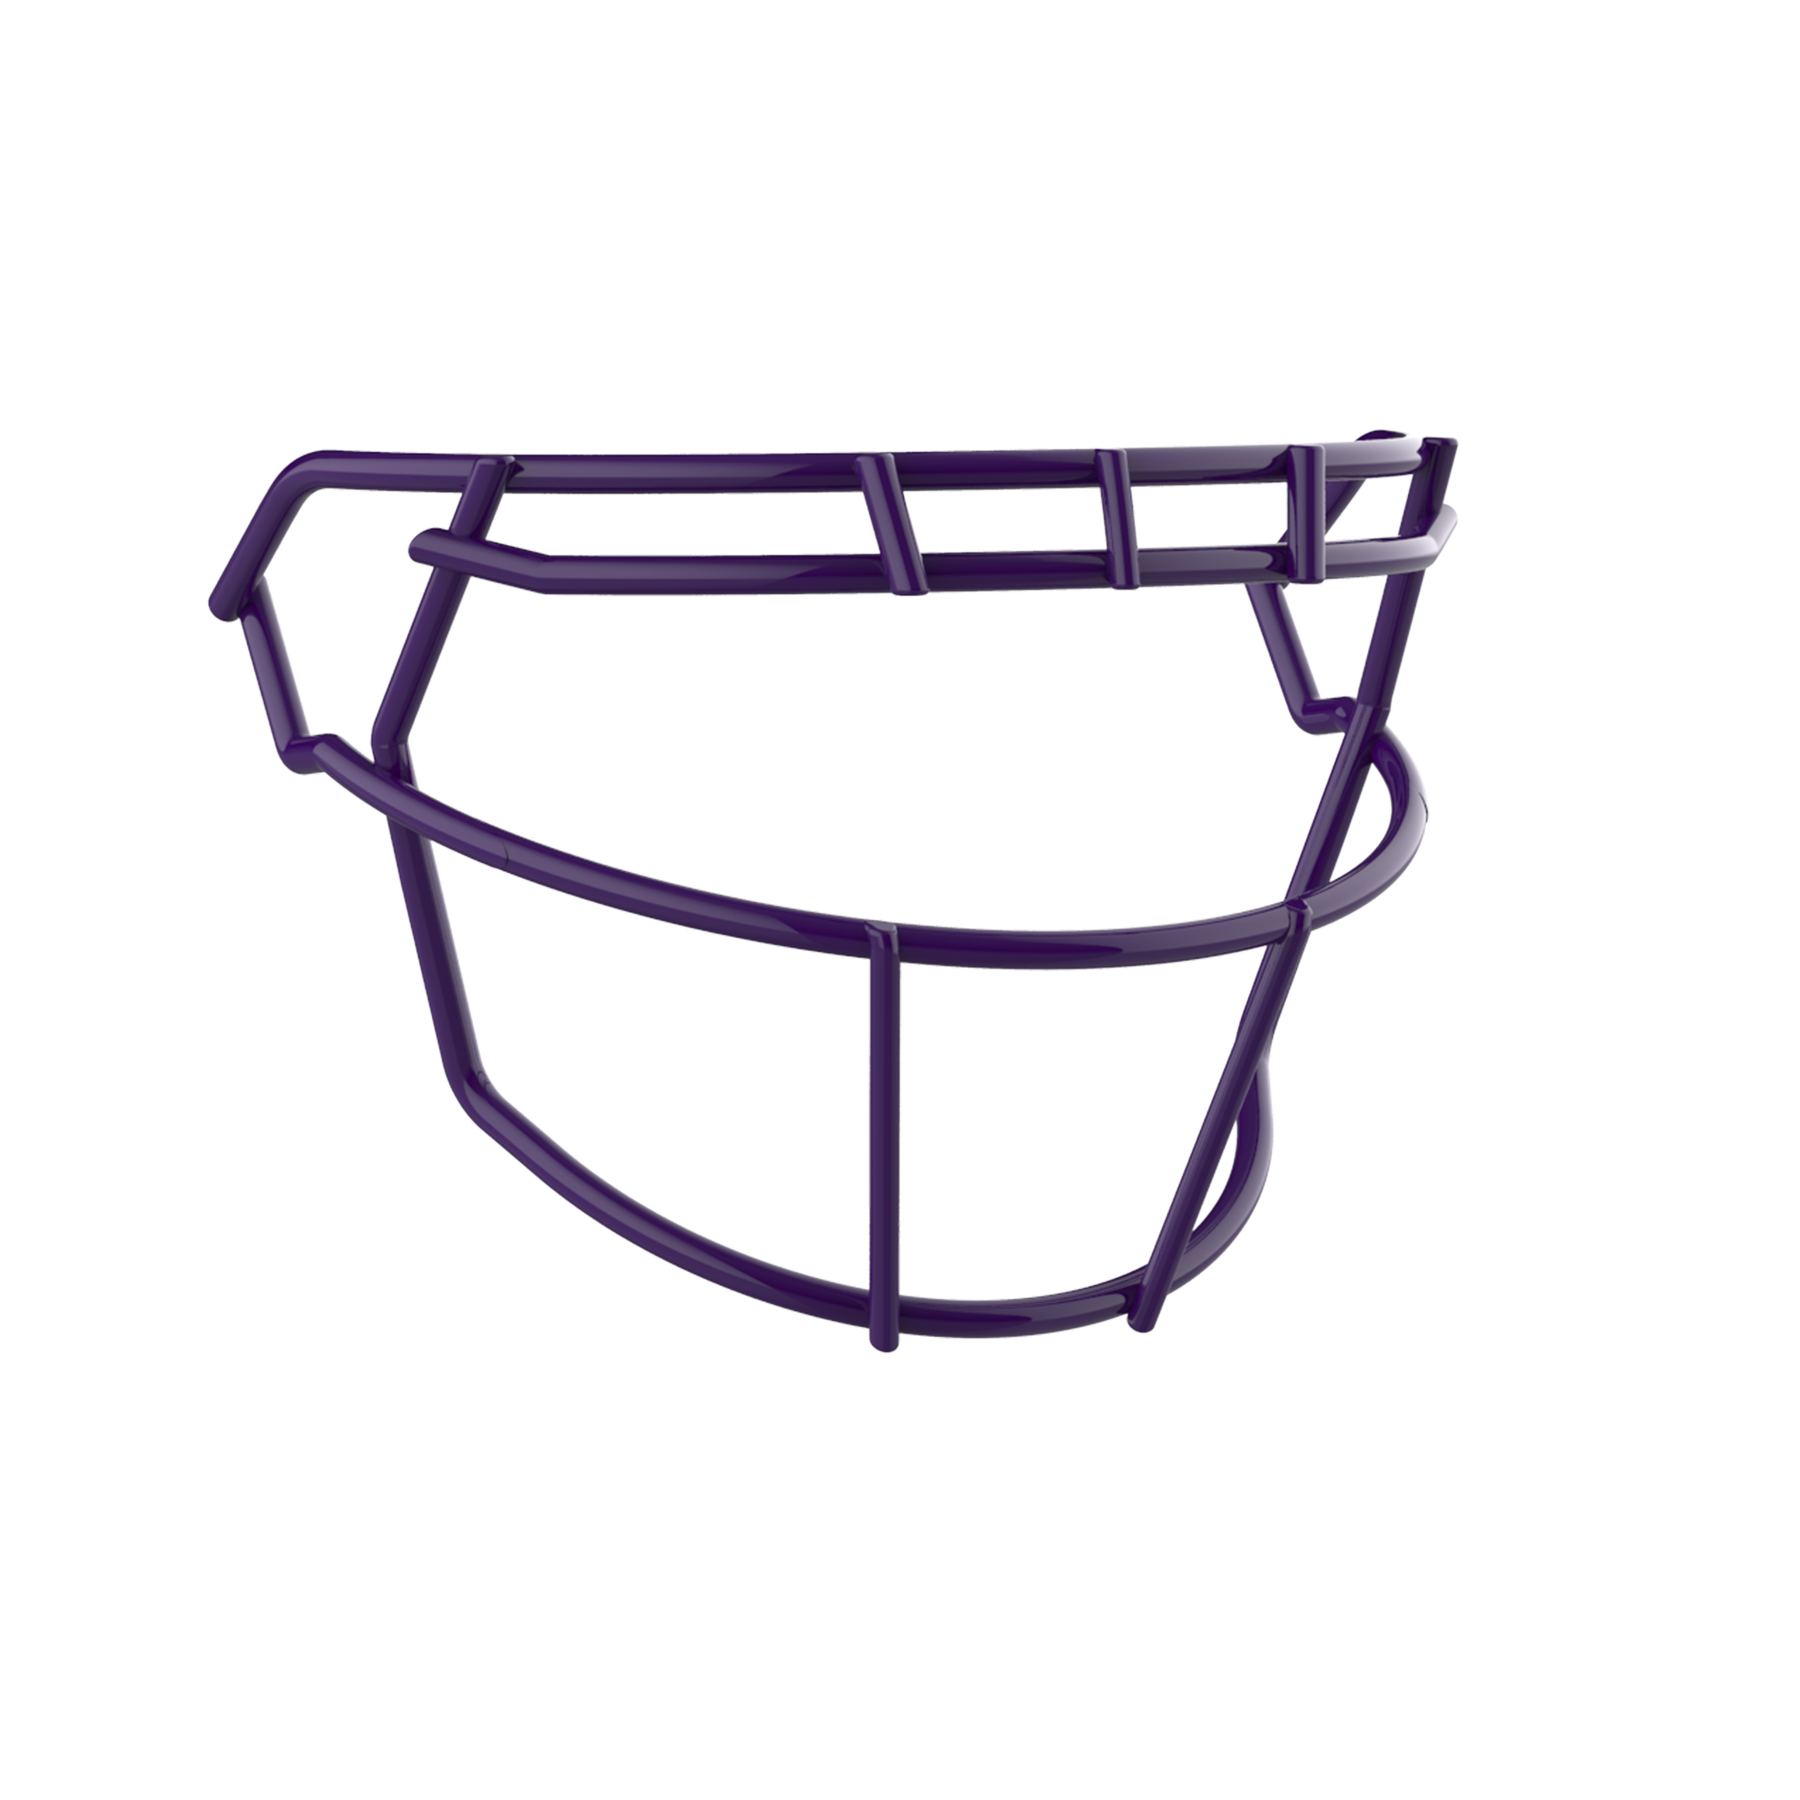 F7 ROPO-SW-NB-VC FACEMASK